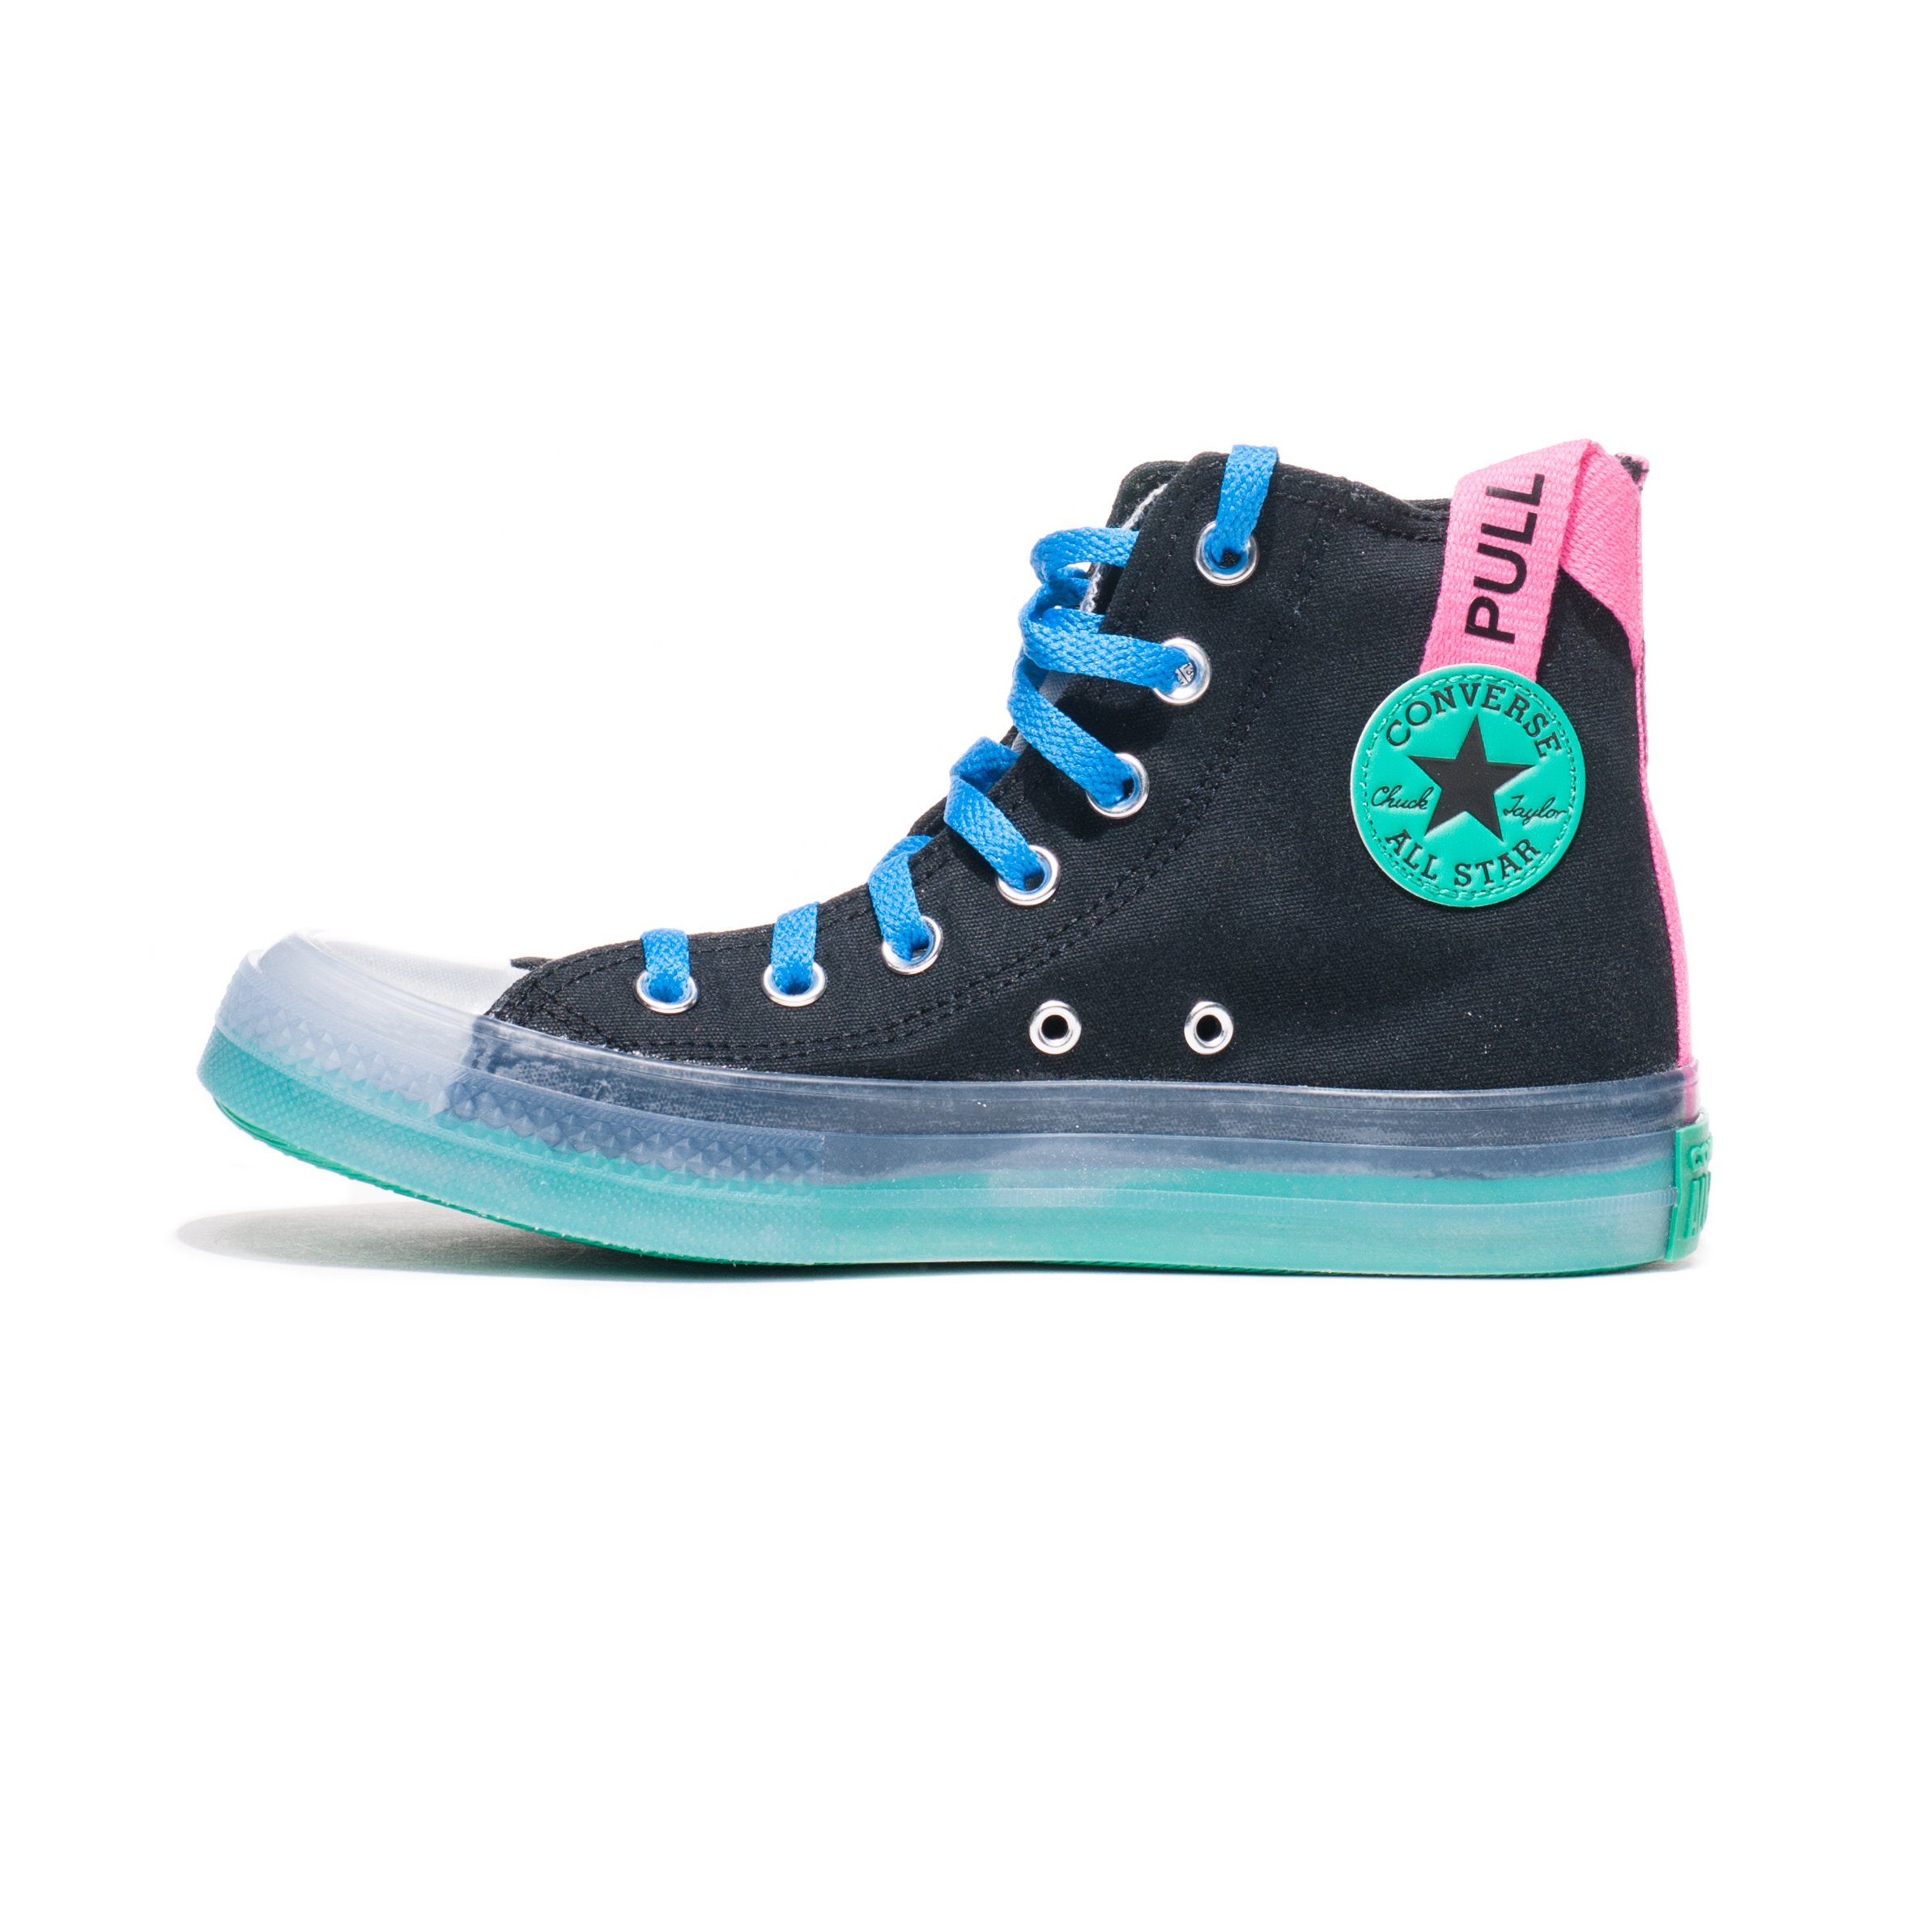 Men's shoes Converse Chuck Taylor All Star Cx Spray Paint Black/ Cyber  Teal/ Ghosted